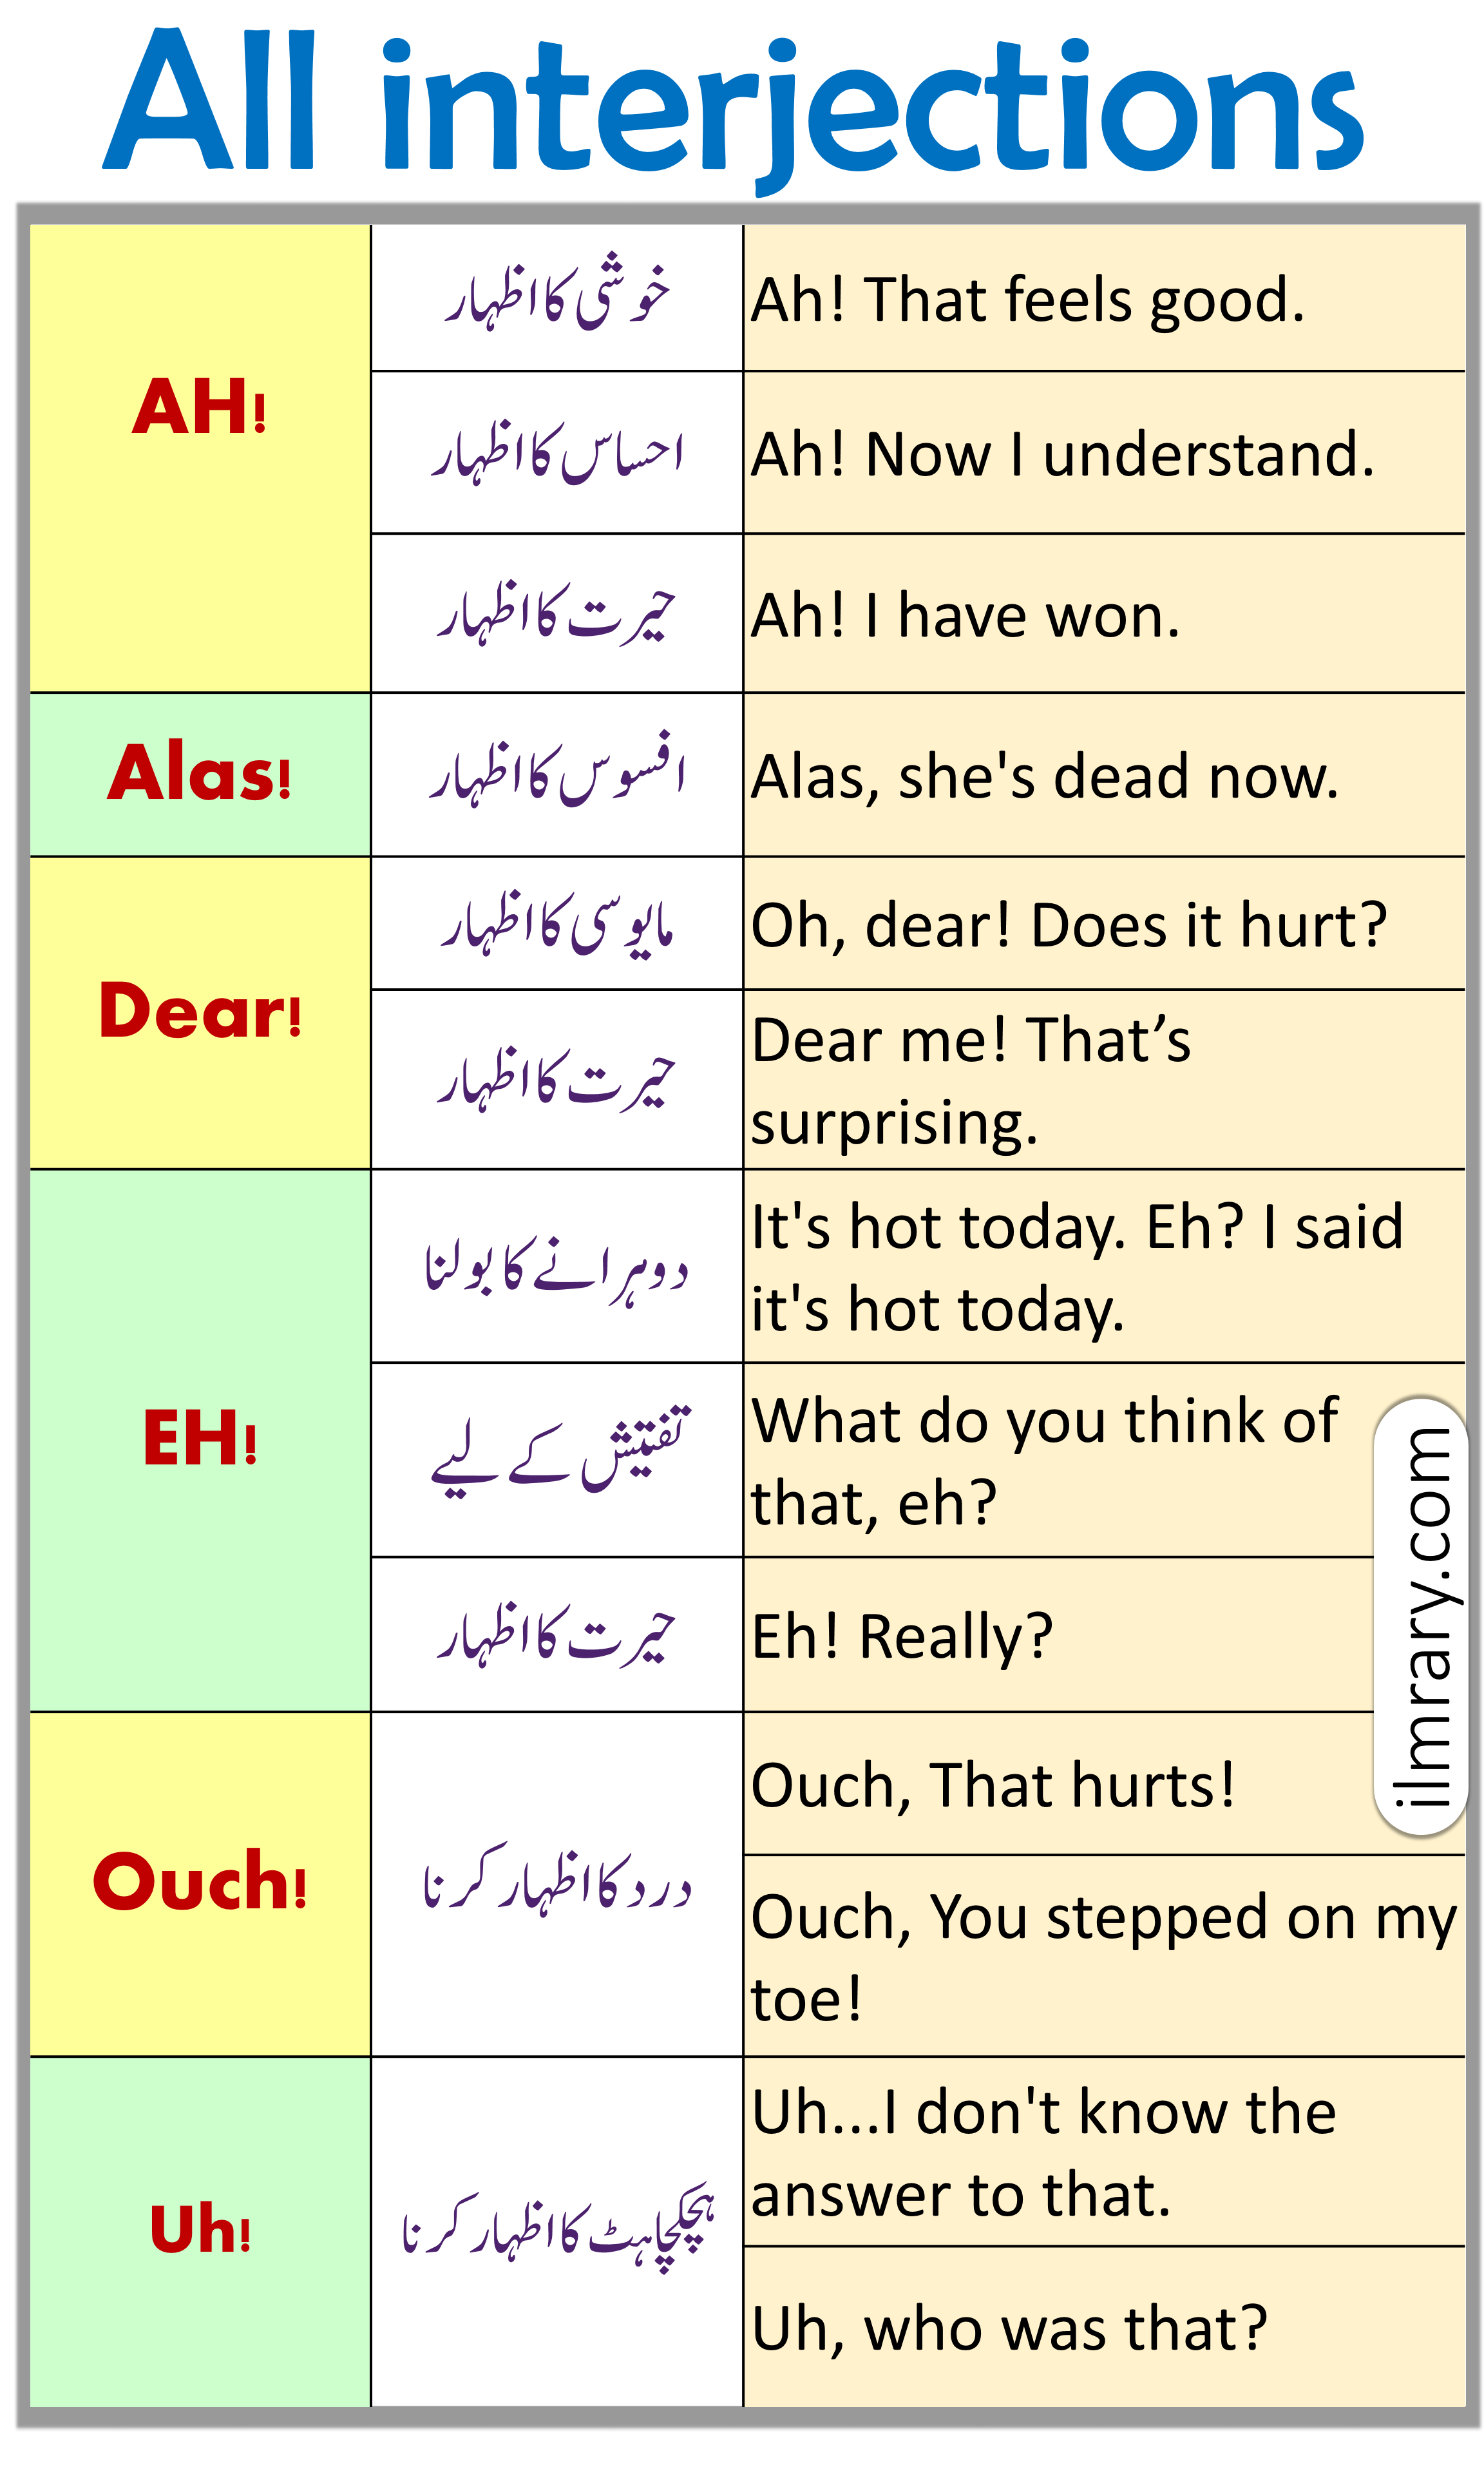 List of All Interjections in English with Urdu Translation